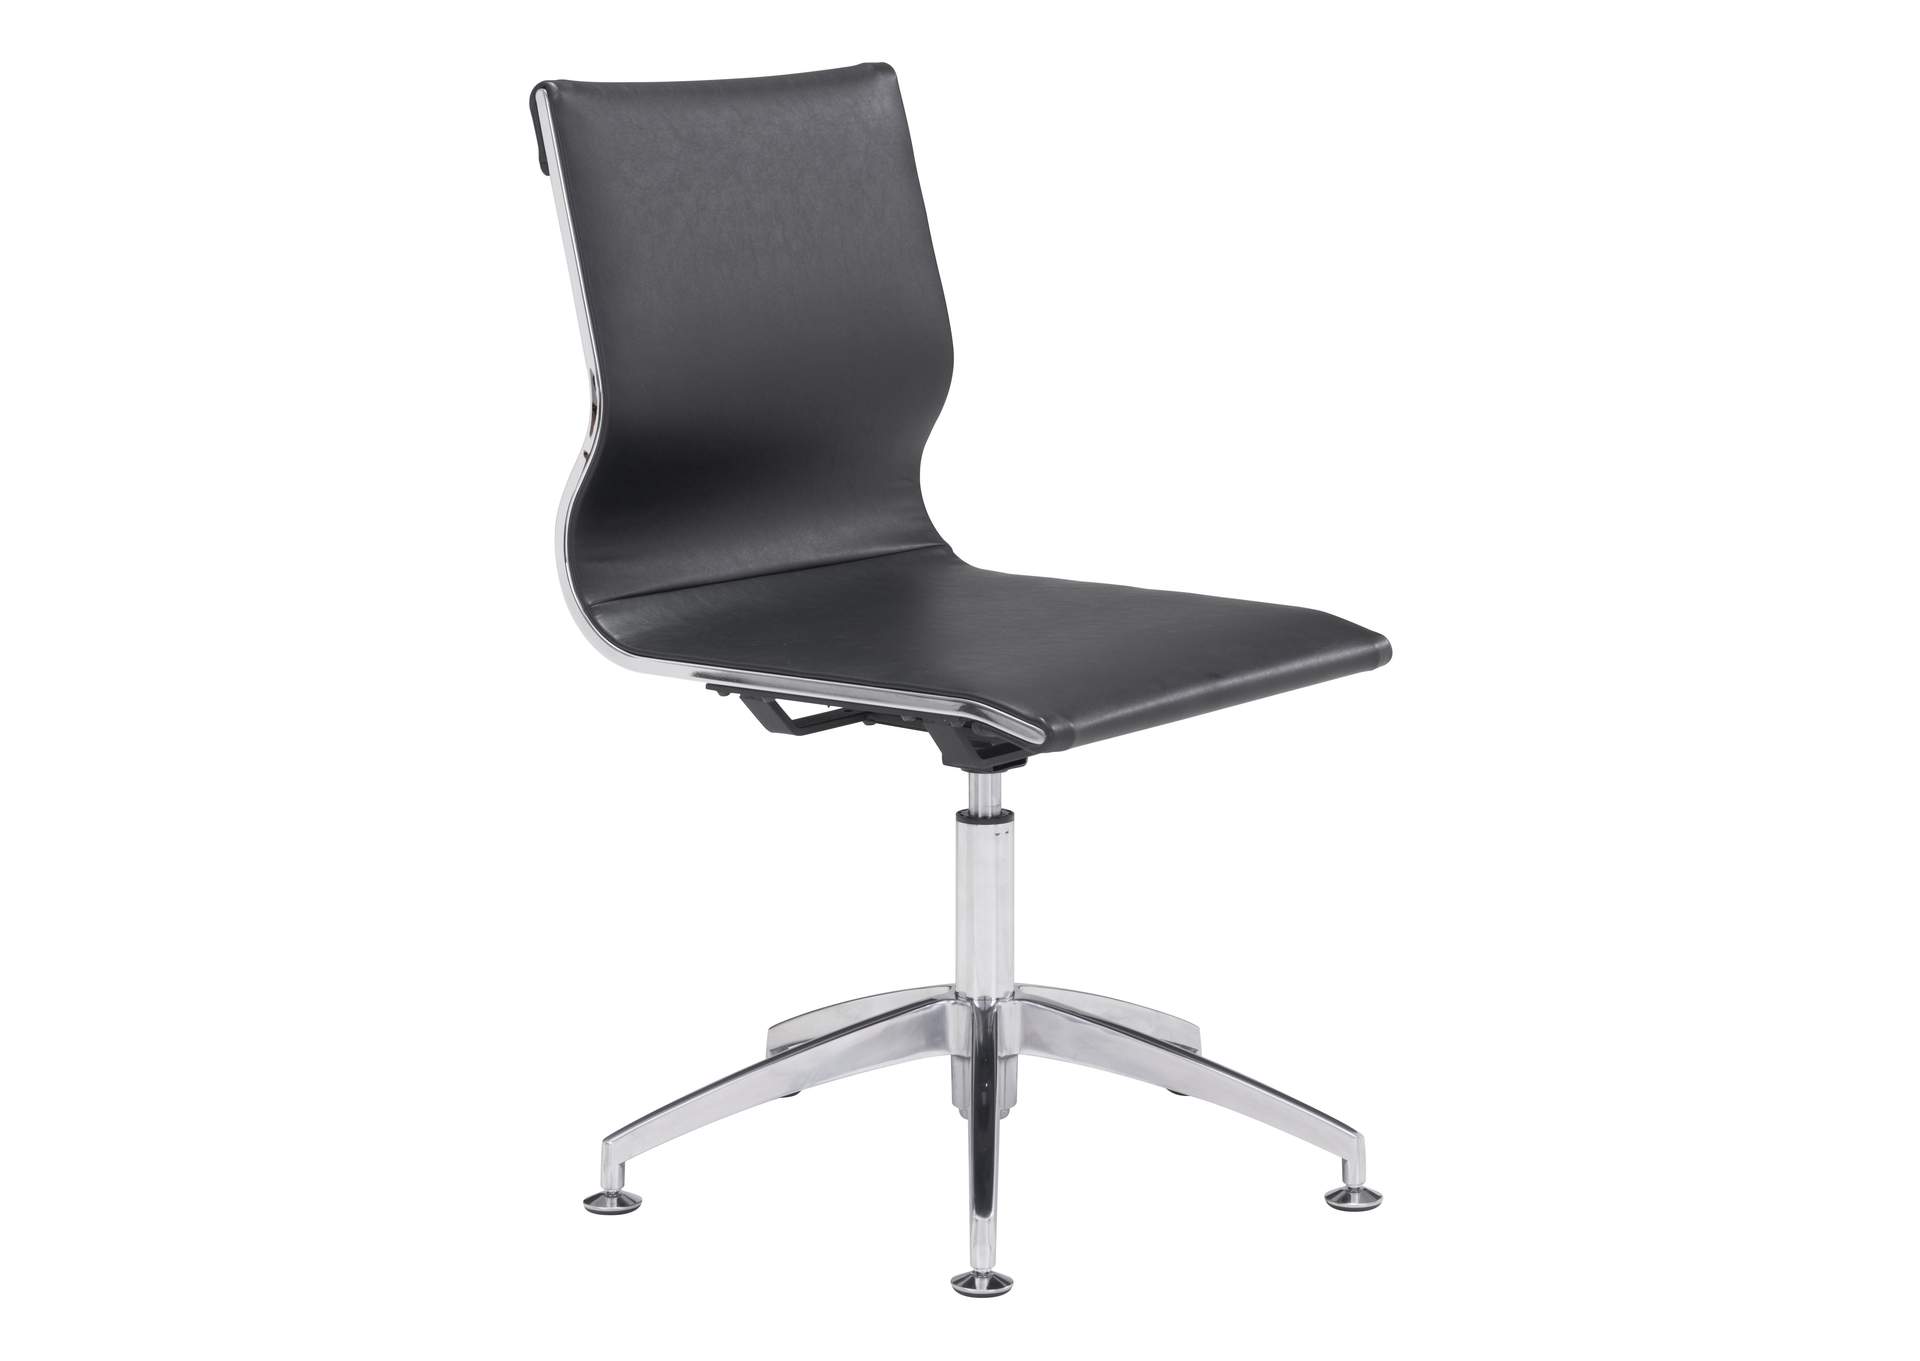 Glider Conference Chair Black,Zuo